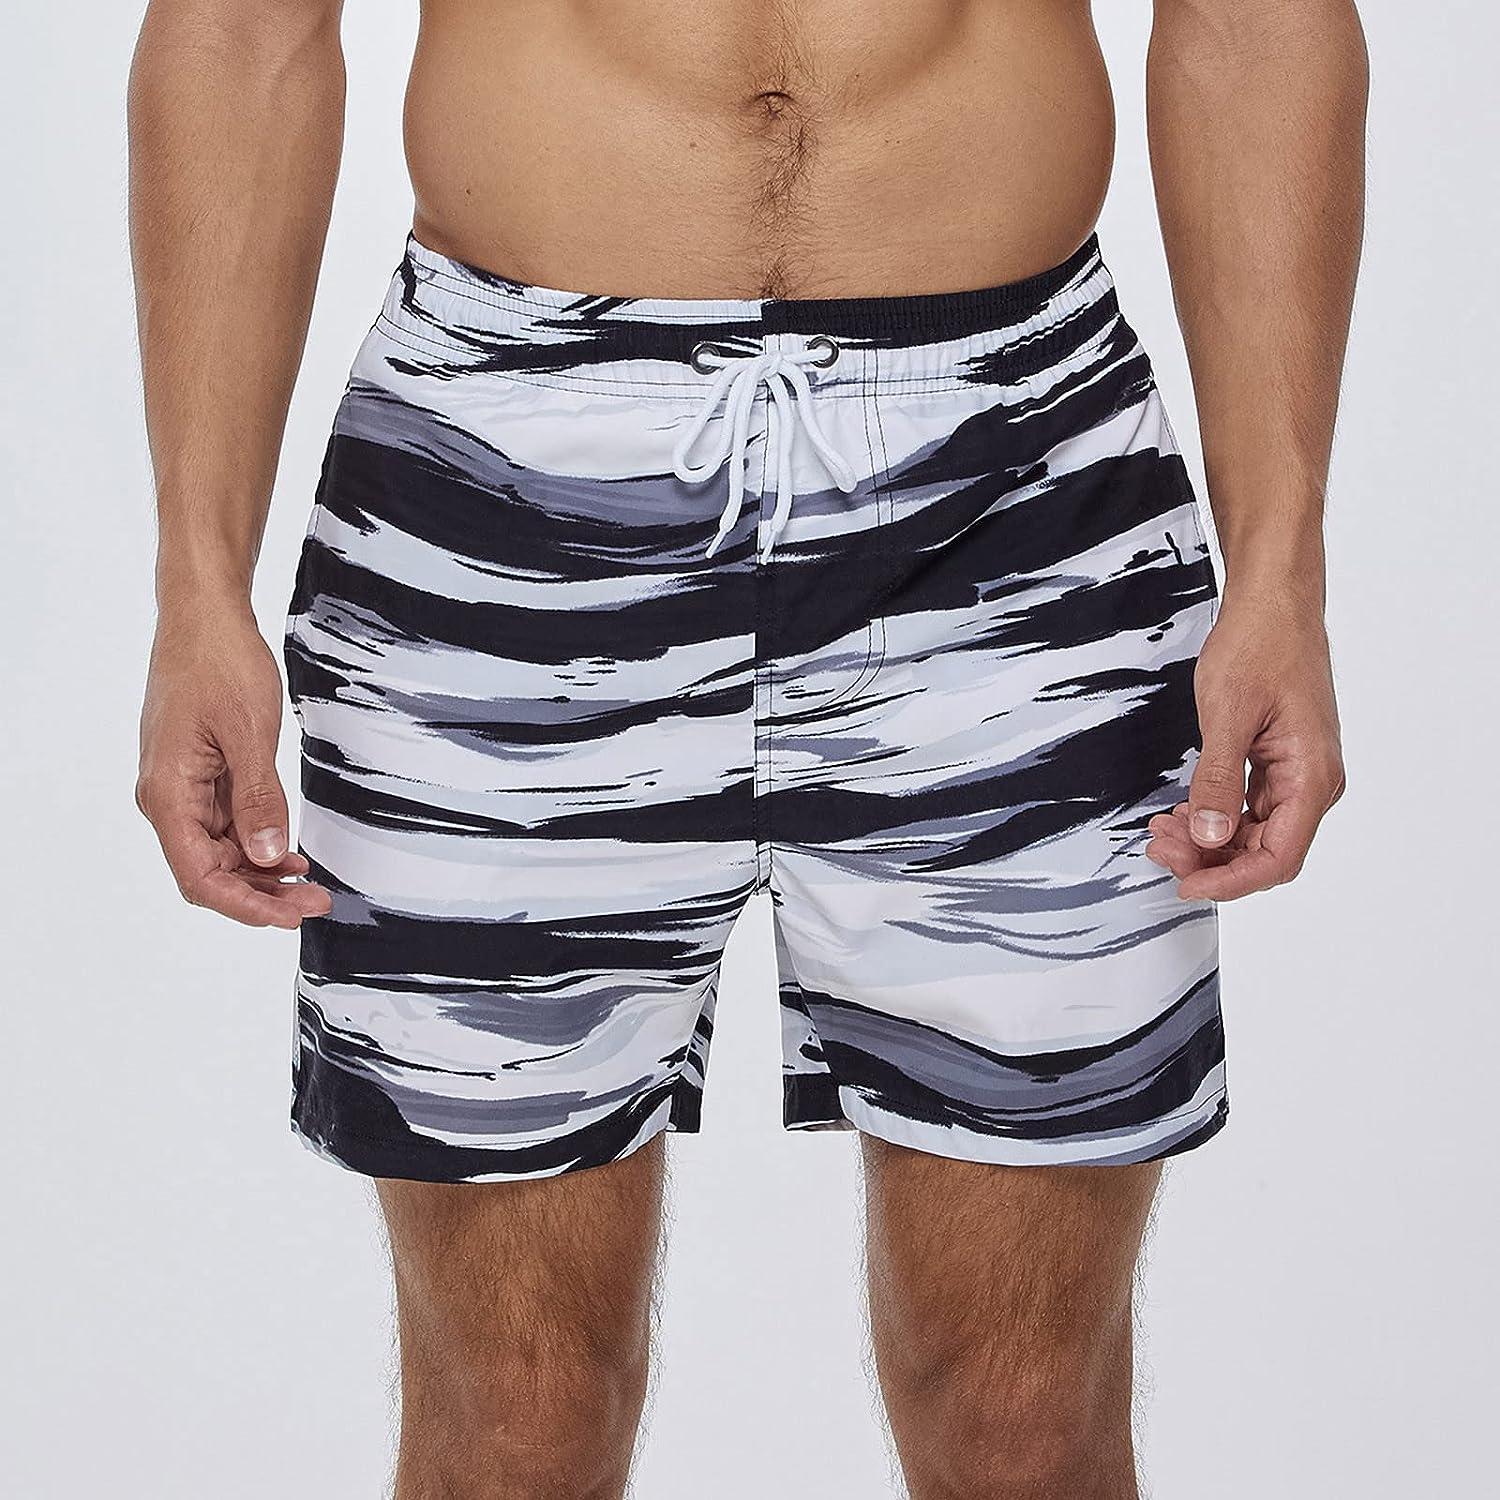 Why Do Swim Trunks Have Netting?